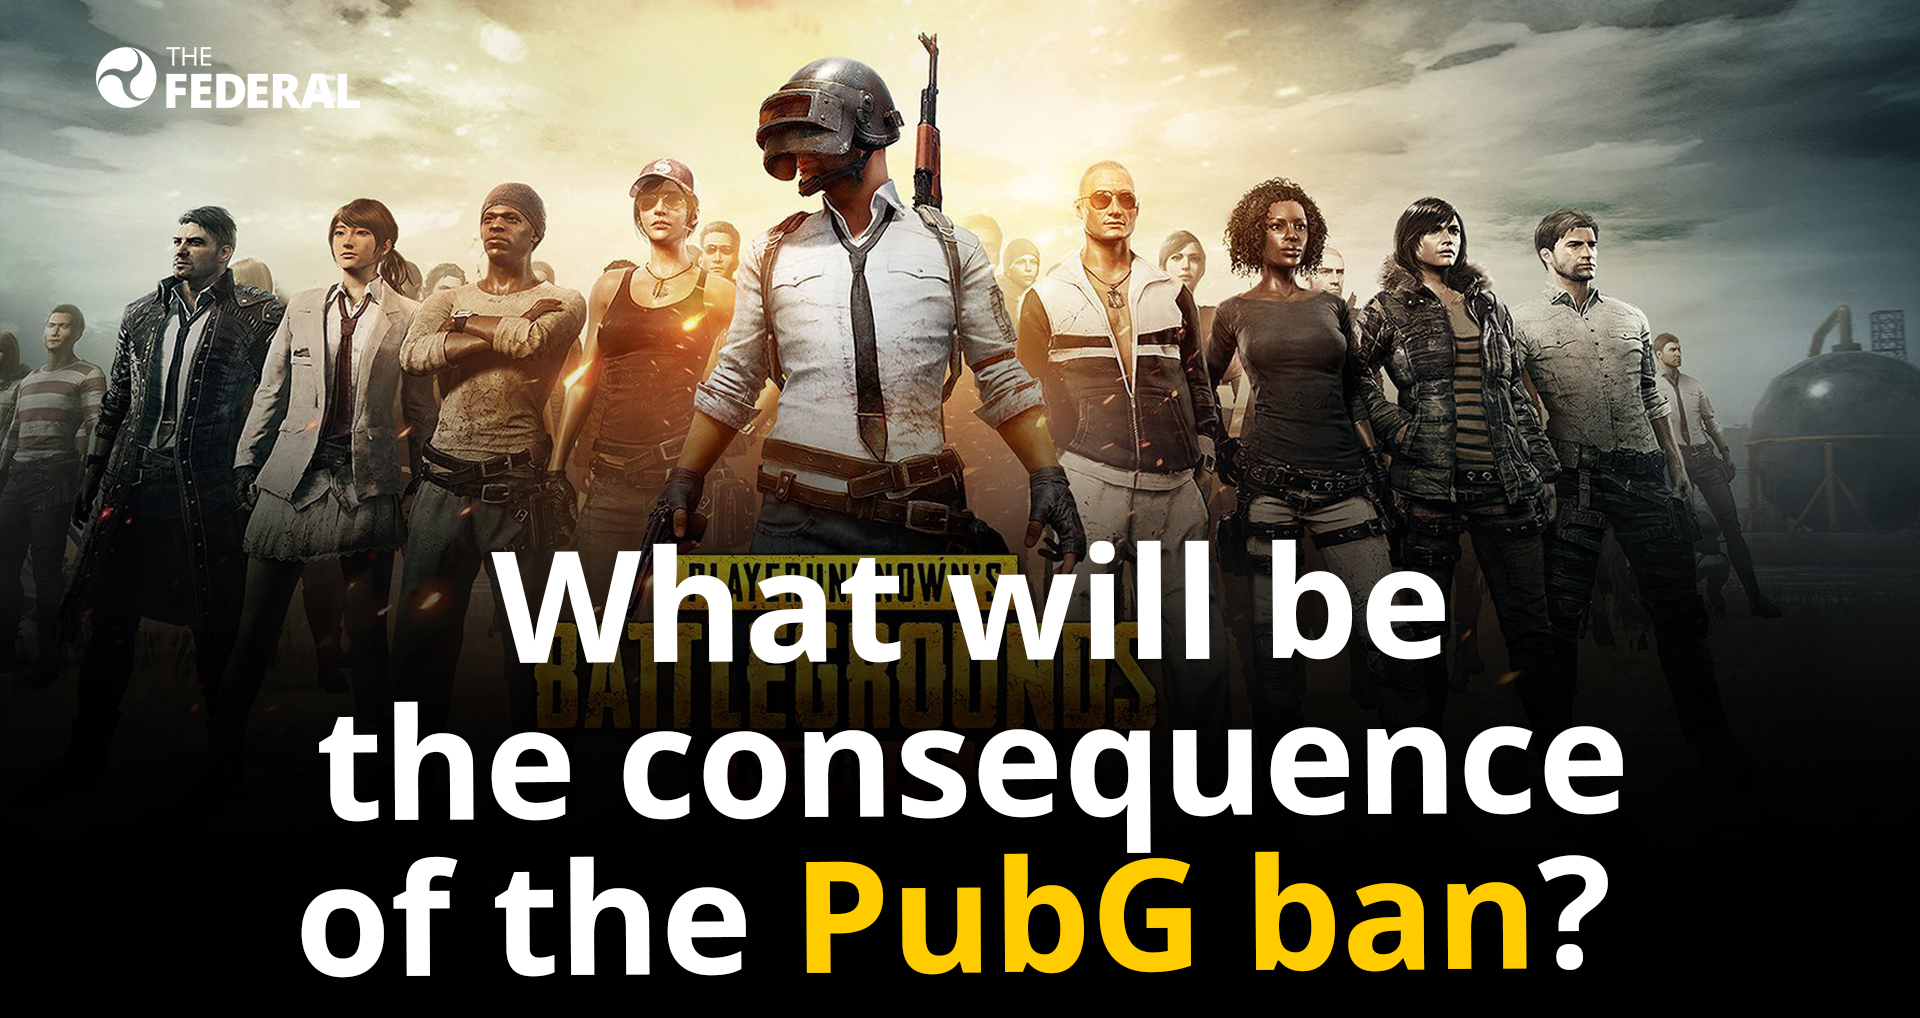 Gamers disappointed over PubG ban, look for alternatives